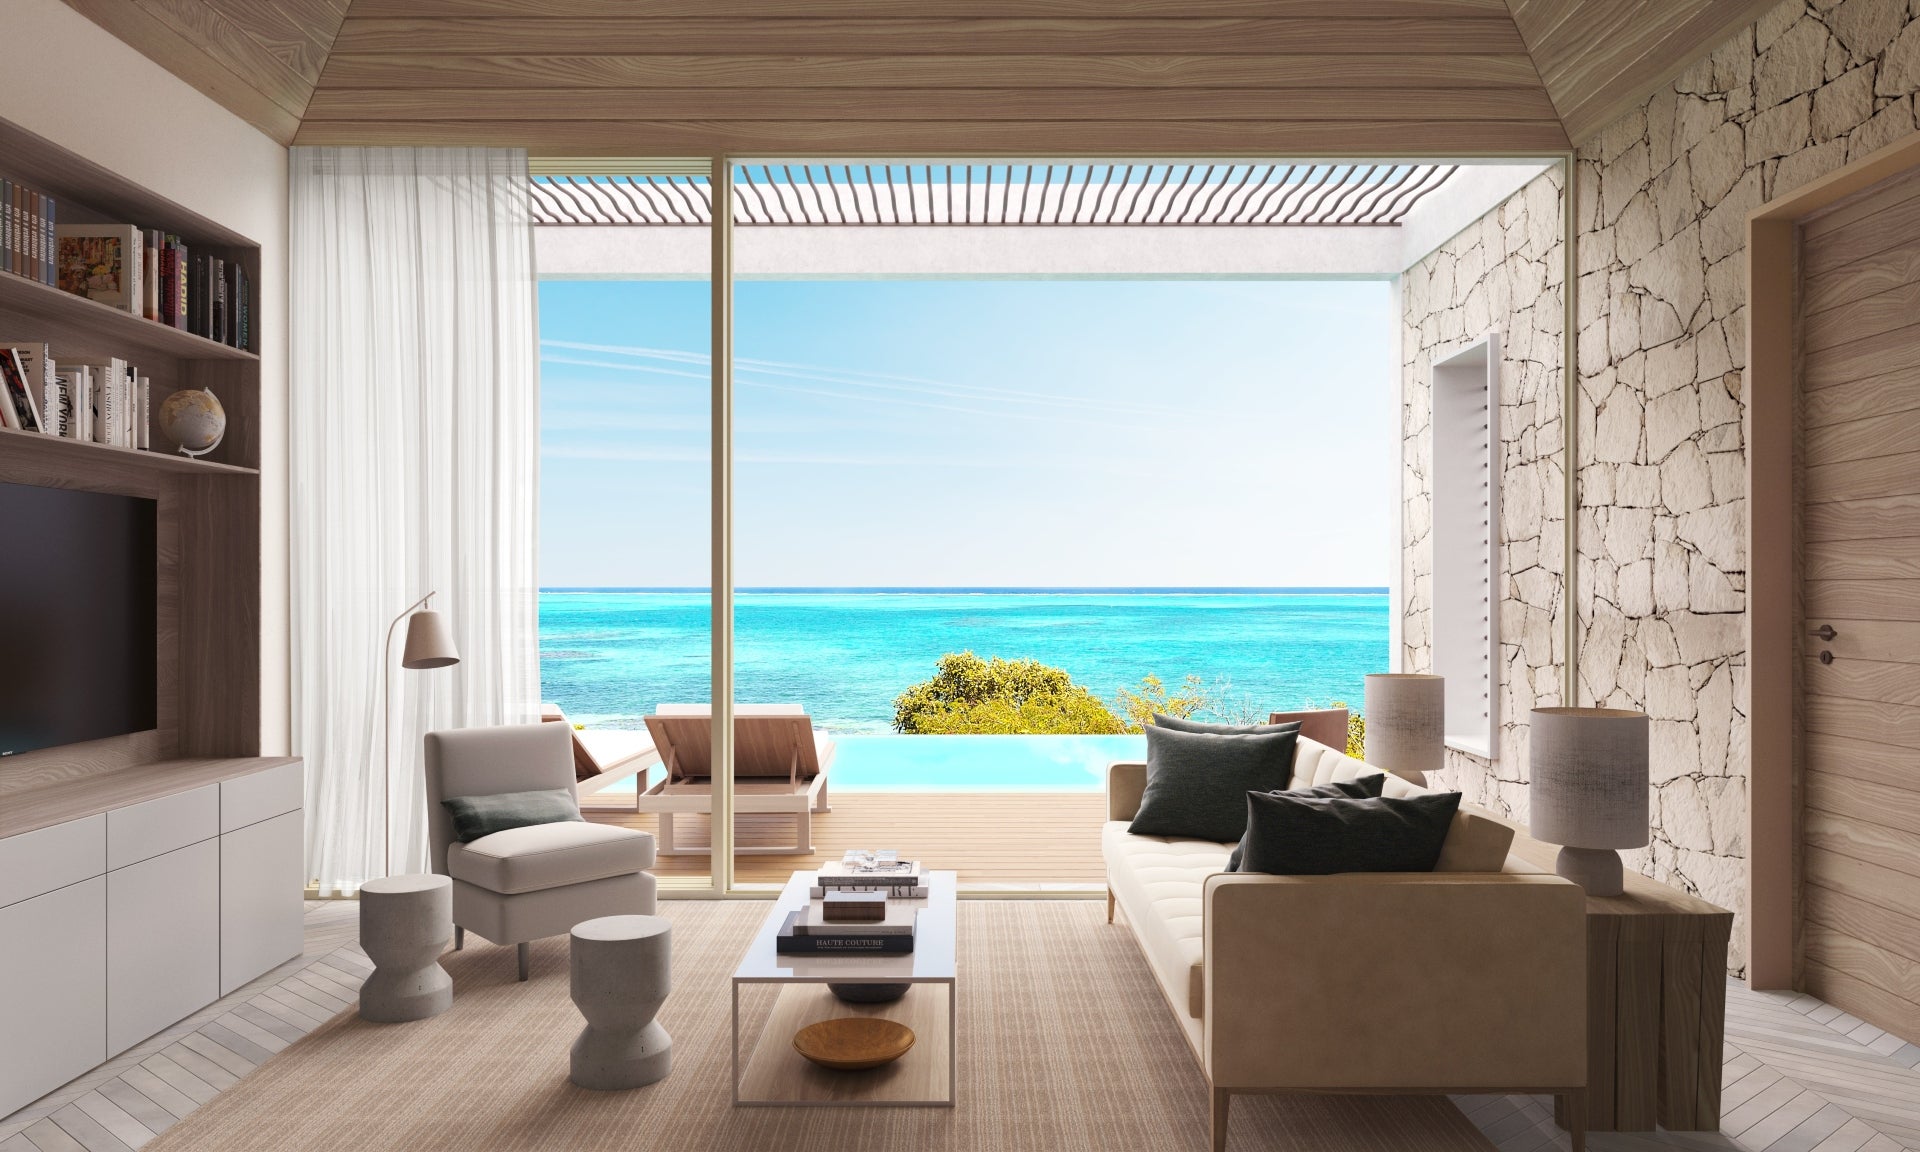 Property in Turks and Caicos Doesn't Get Better than This